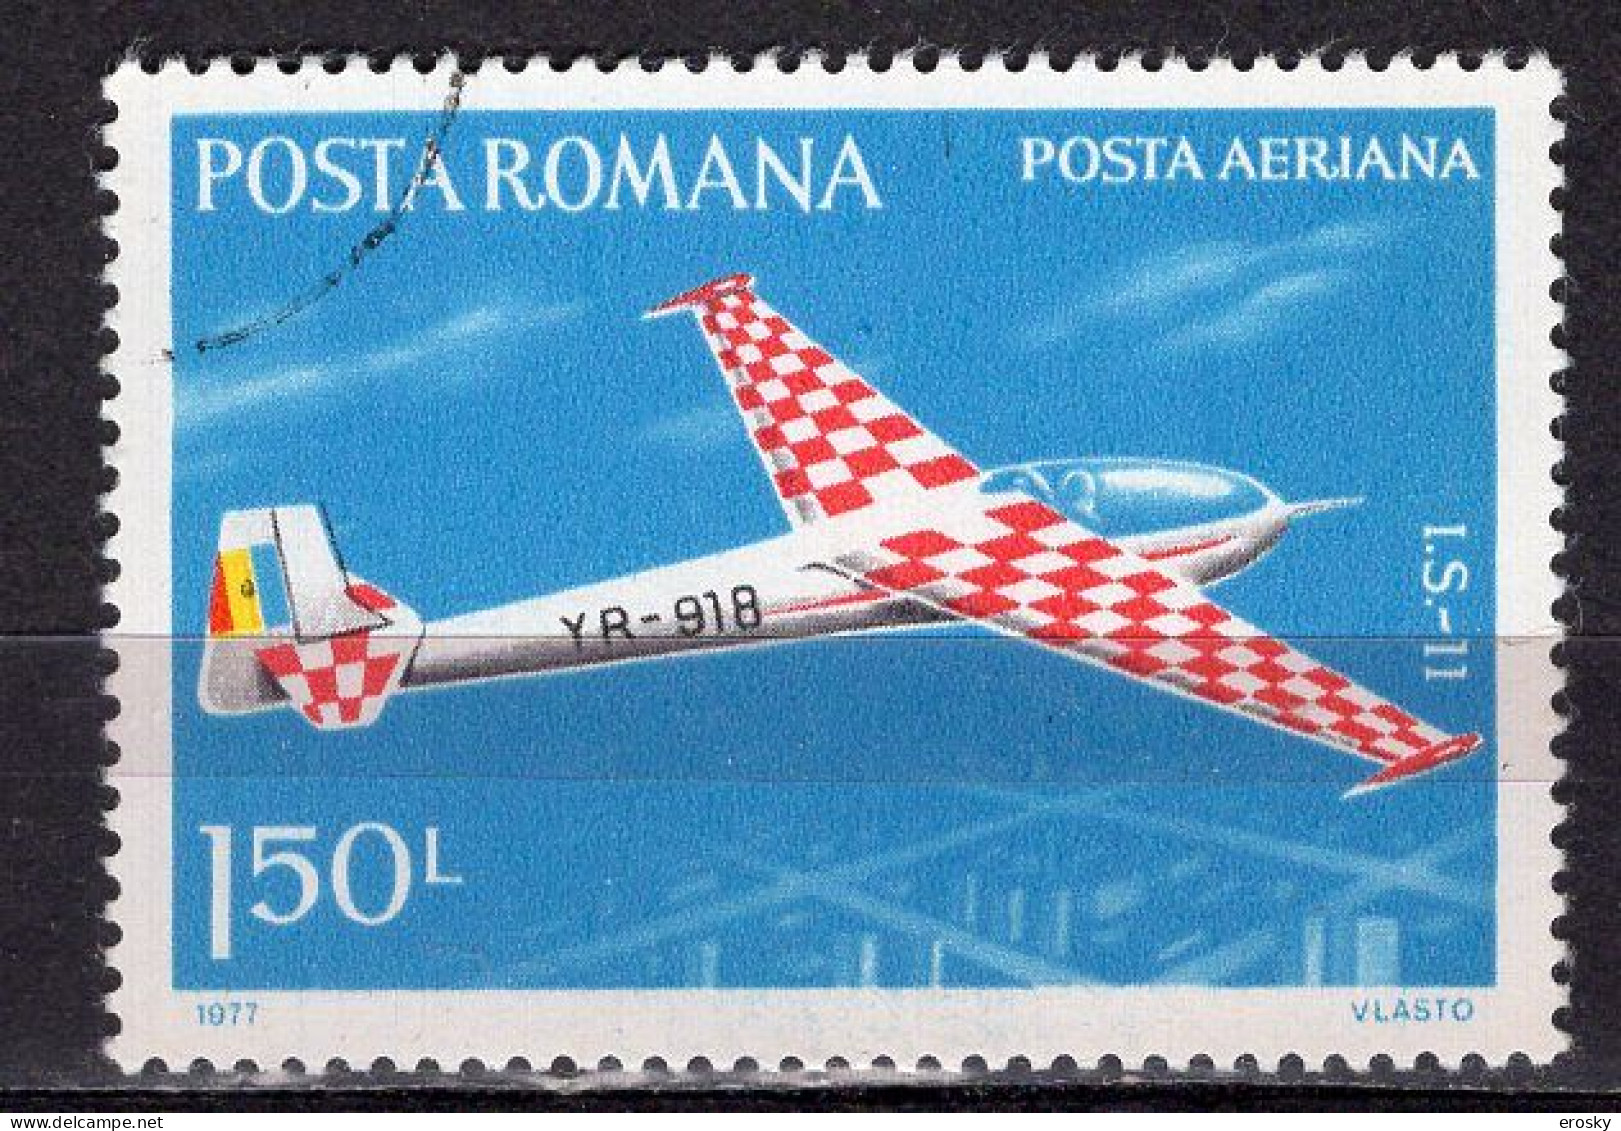 S2764 - ROMANIA ROUMANIE AERIENNE Yv N°248 - Used Stamps